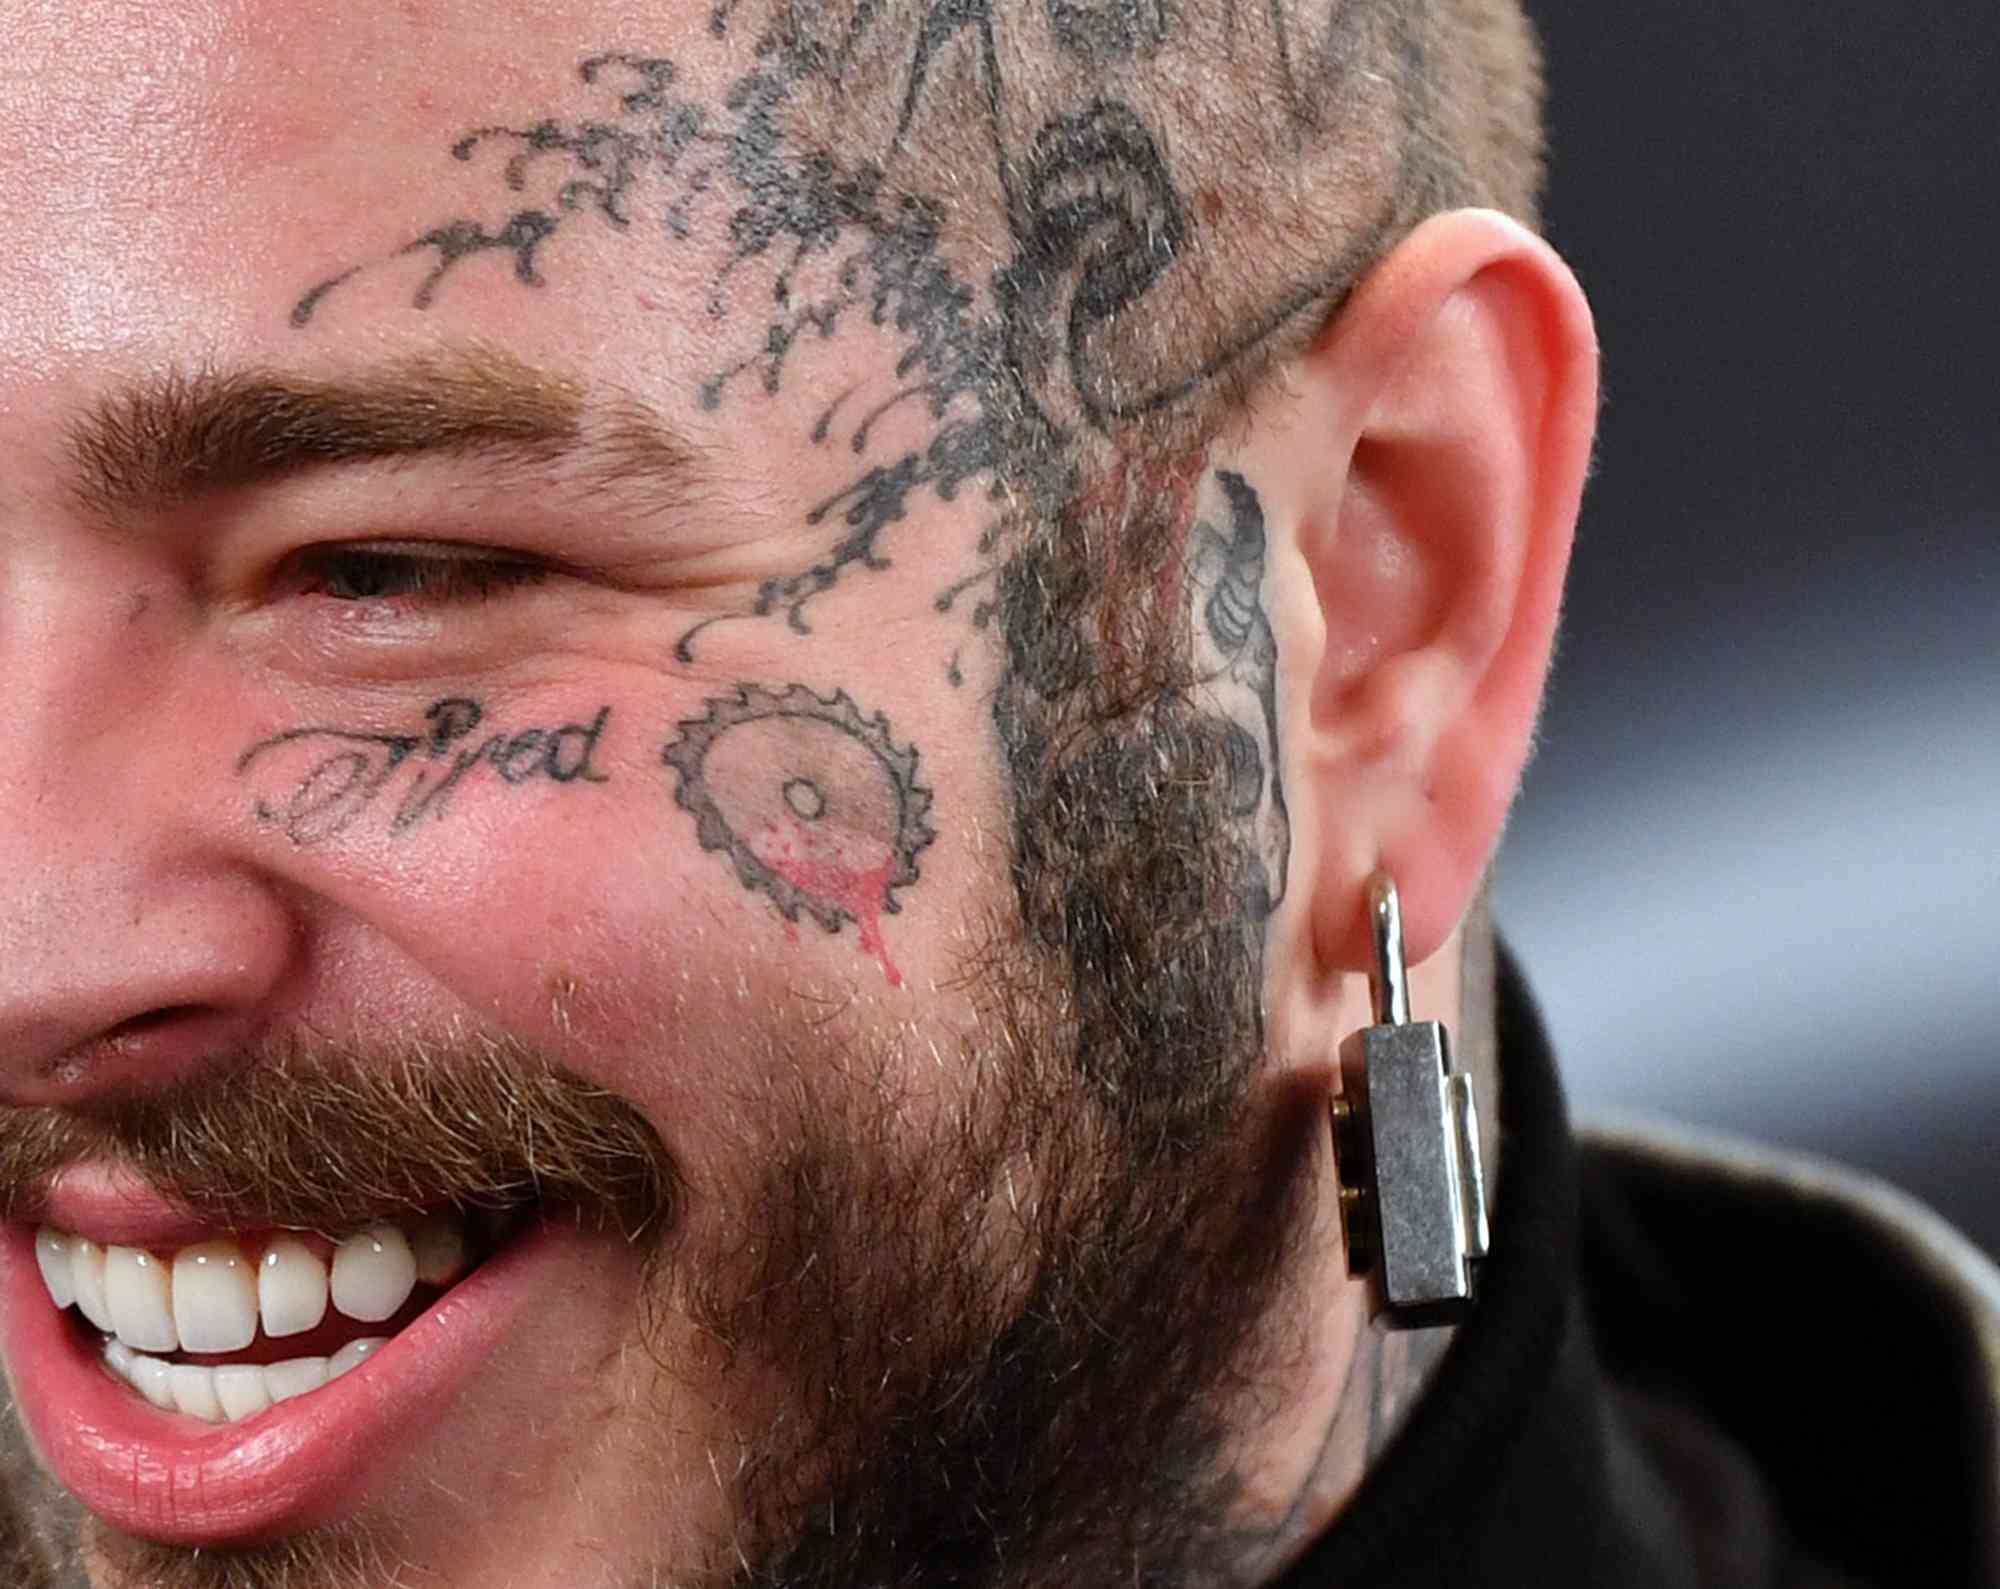 Post Malone (tattoo detail) poses backstage at the 2020 Billboard Music Awards, broadcast on October 14, 2020 at the Dolby Theatre in Los Angeles, CA